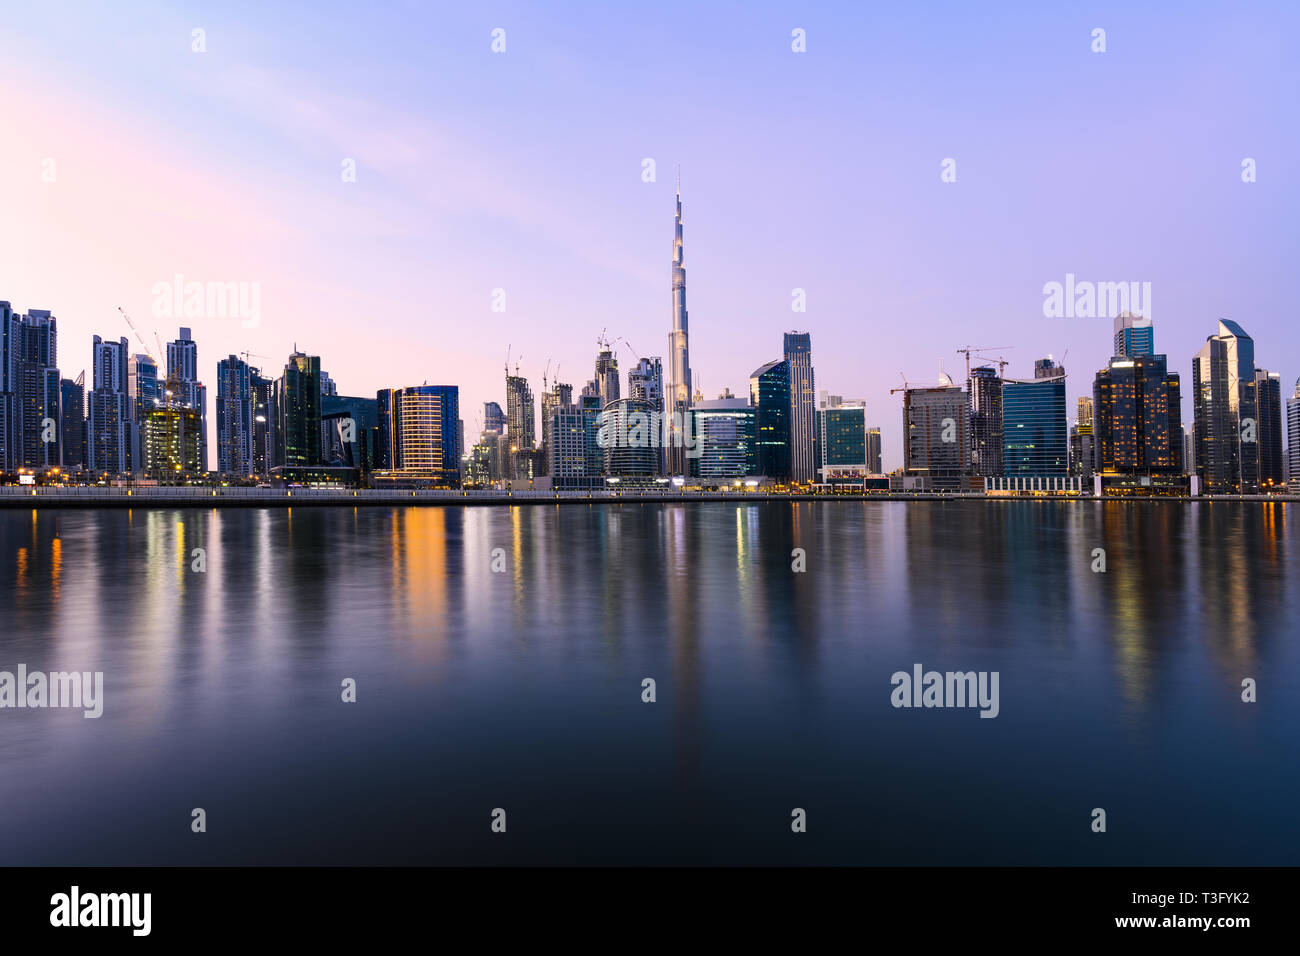 Stunning panoramic view of the Dubai skyline during sunset with the magnificent Burj Khalifa and many other buildings and skyscrapers. Dubai, UEA. Stock Photo